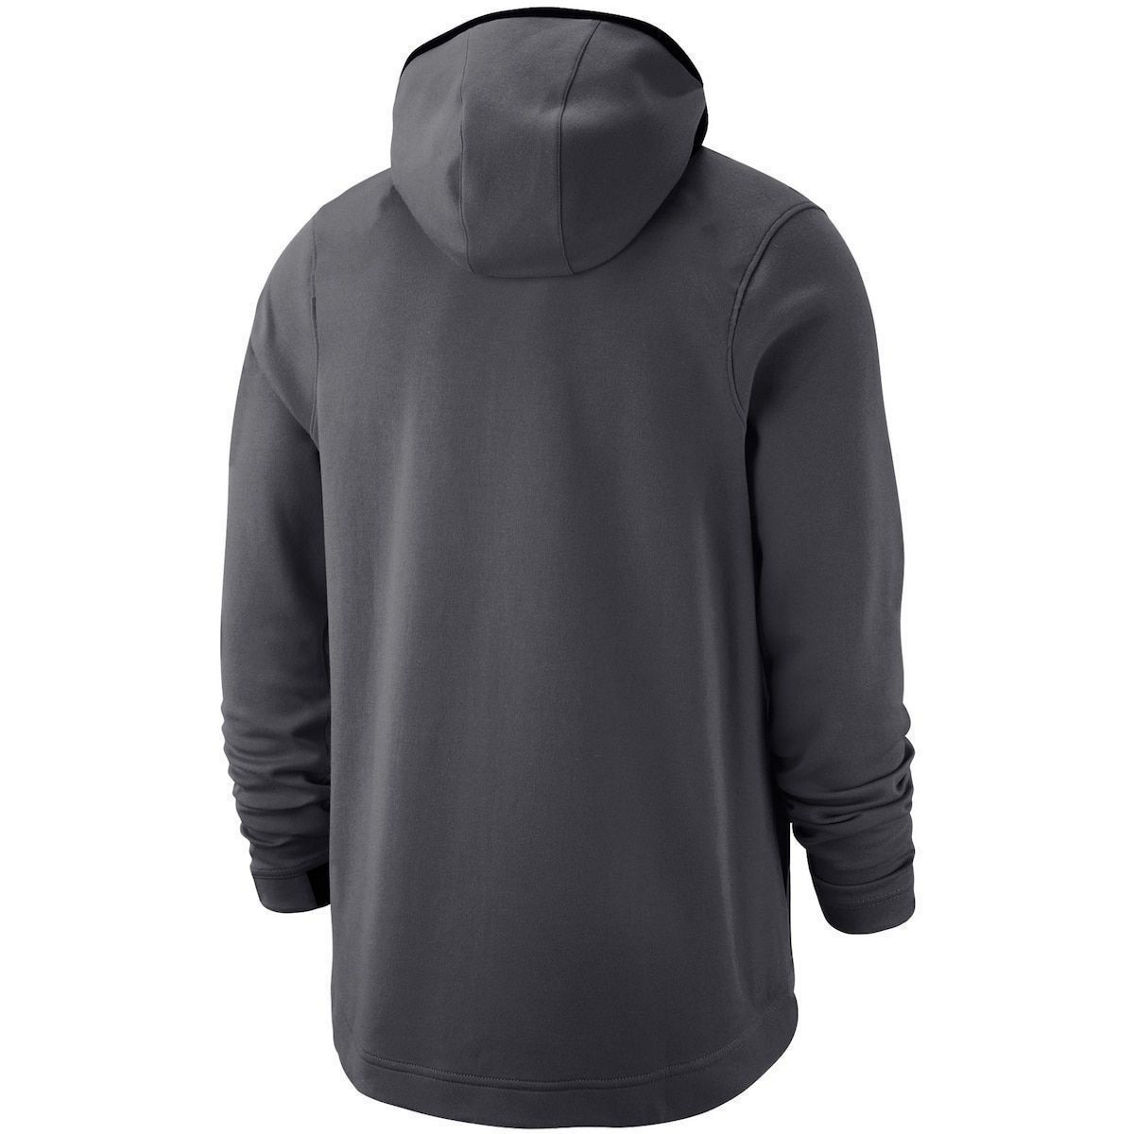 Nike Men's Anthracite Army Black Knights Tonal Showtime Full-Zip Hoodie - Image 4 of 4